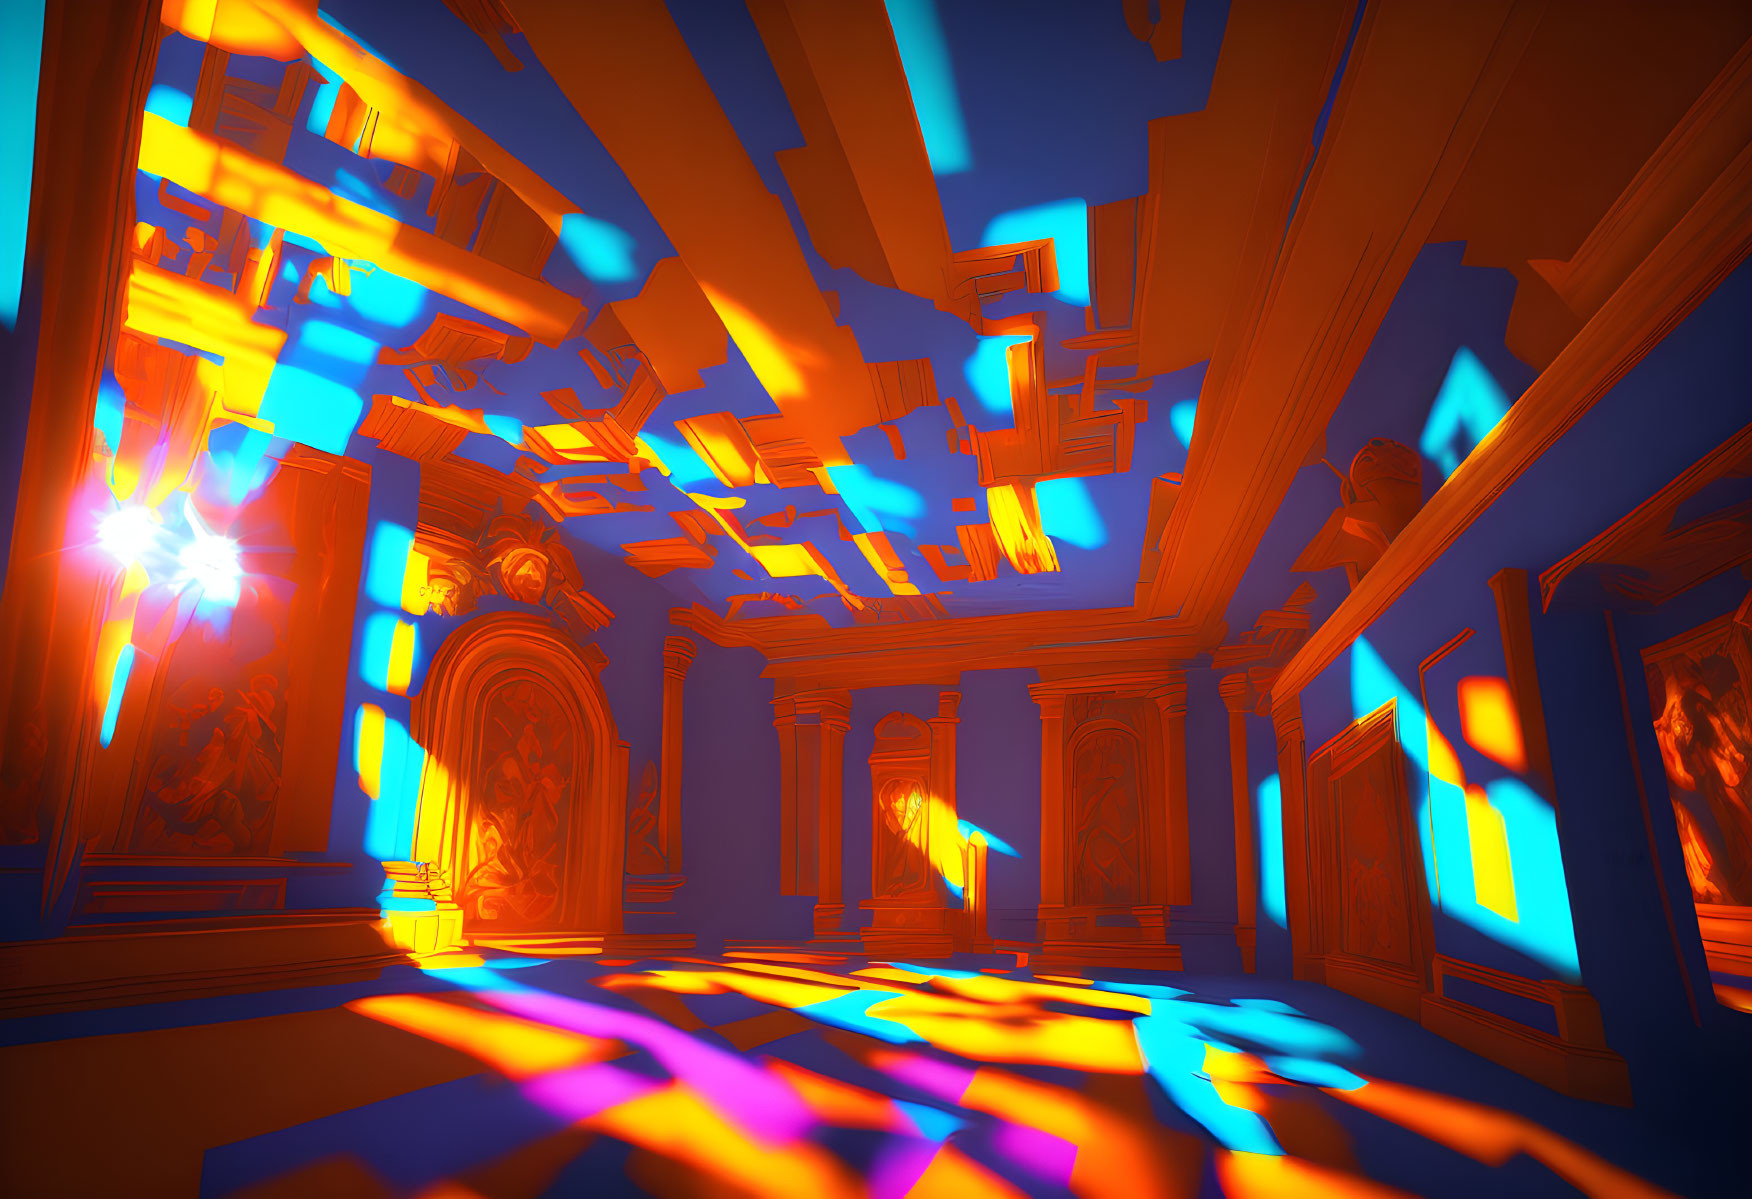 Abstract Art: Neon Blue and Orange Colors, Distorted Architectural Space